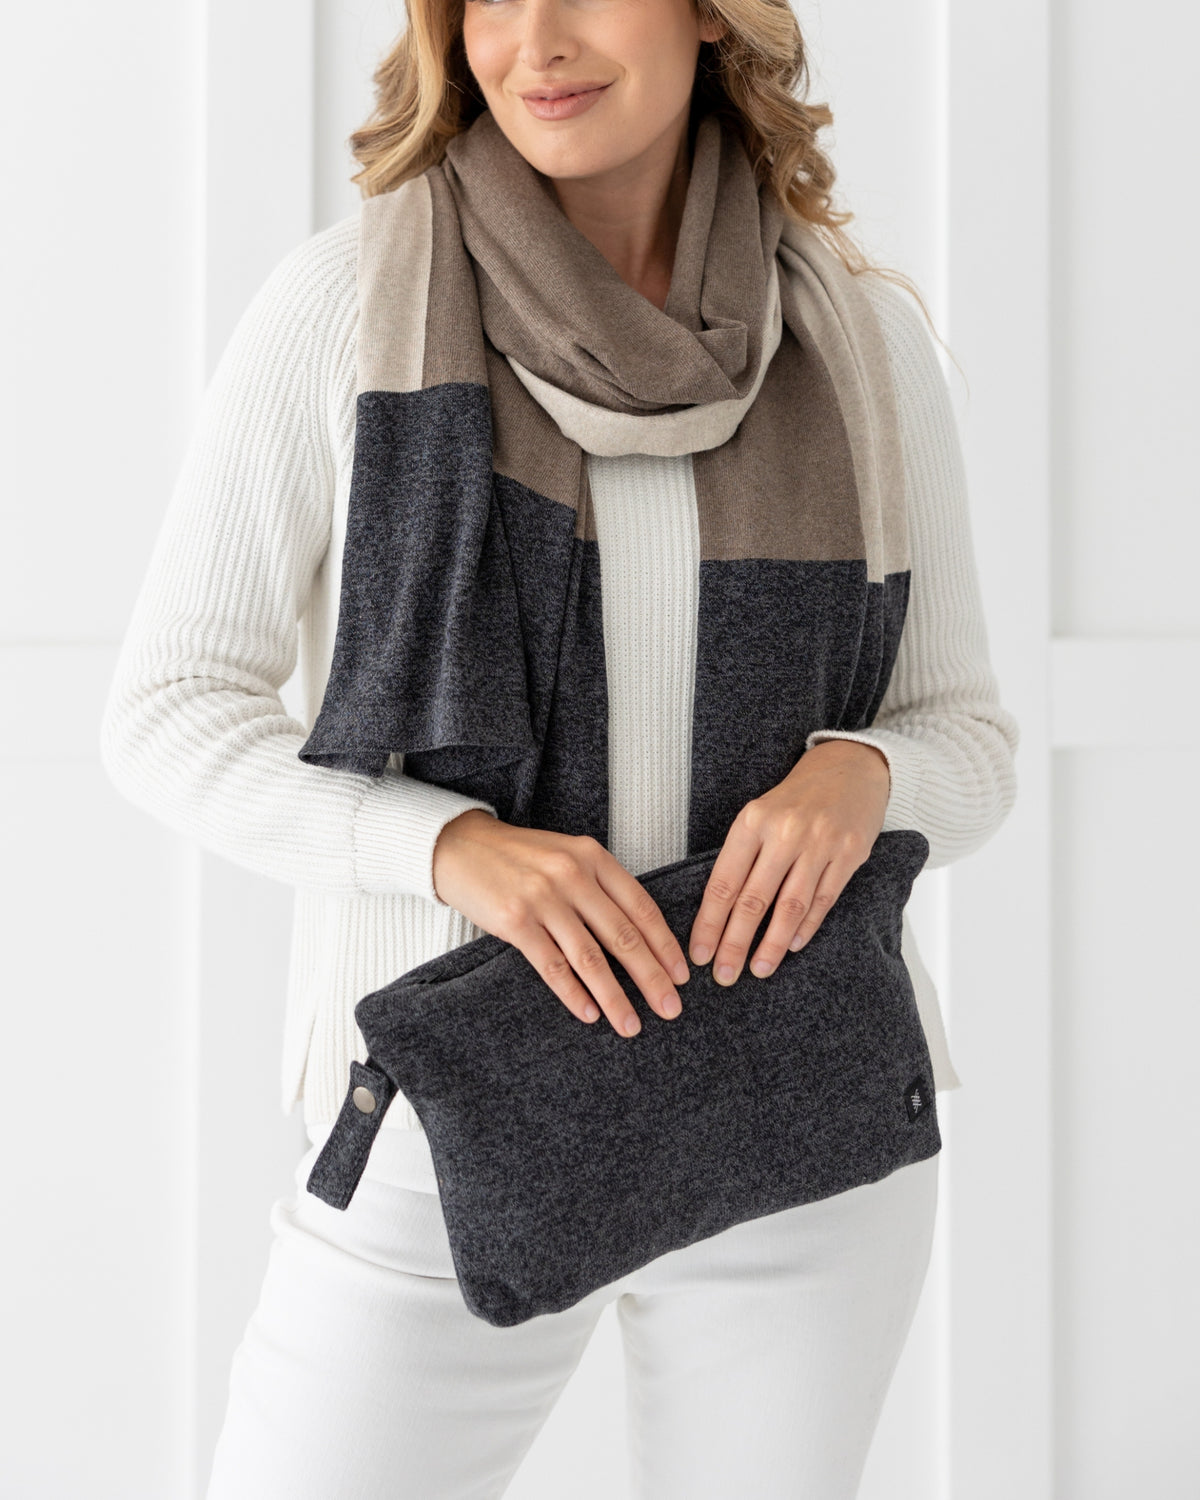 Woman holding Graphite Carry Pouch, which is a Gray zipper pouch that can hold the Dreamsoft Travel Scarf, woman is shown wearing a Brownstone Colorblock Dreamsoft Travel Scarf which is gray, beige and tan